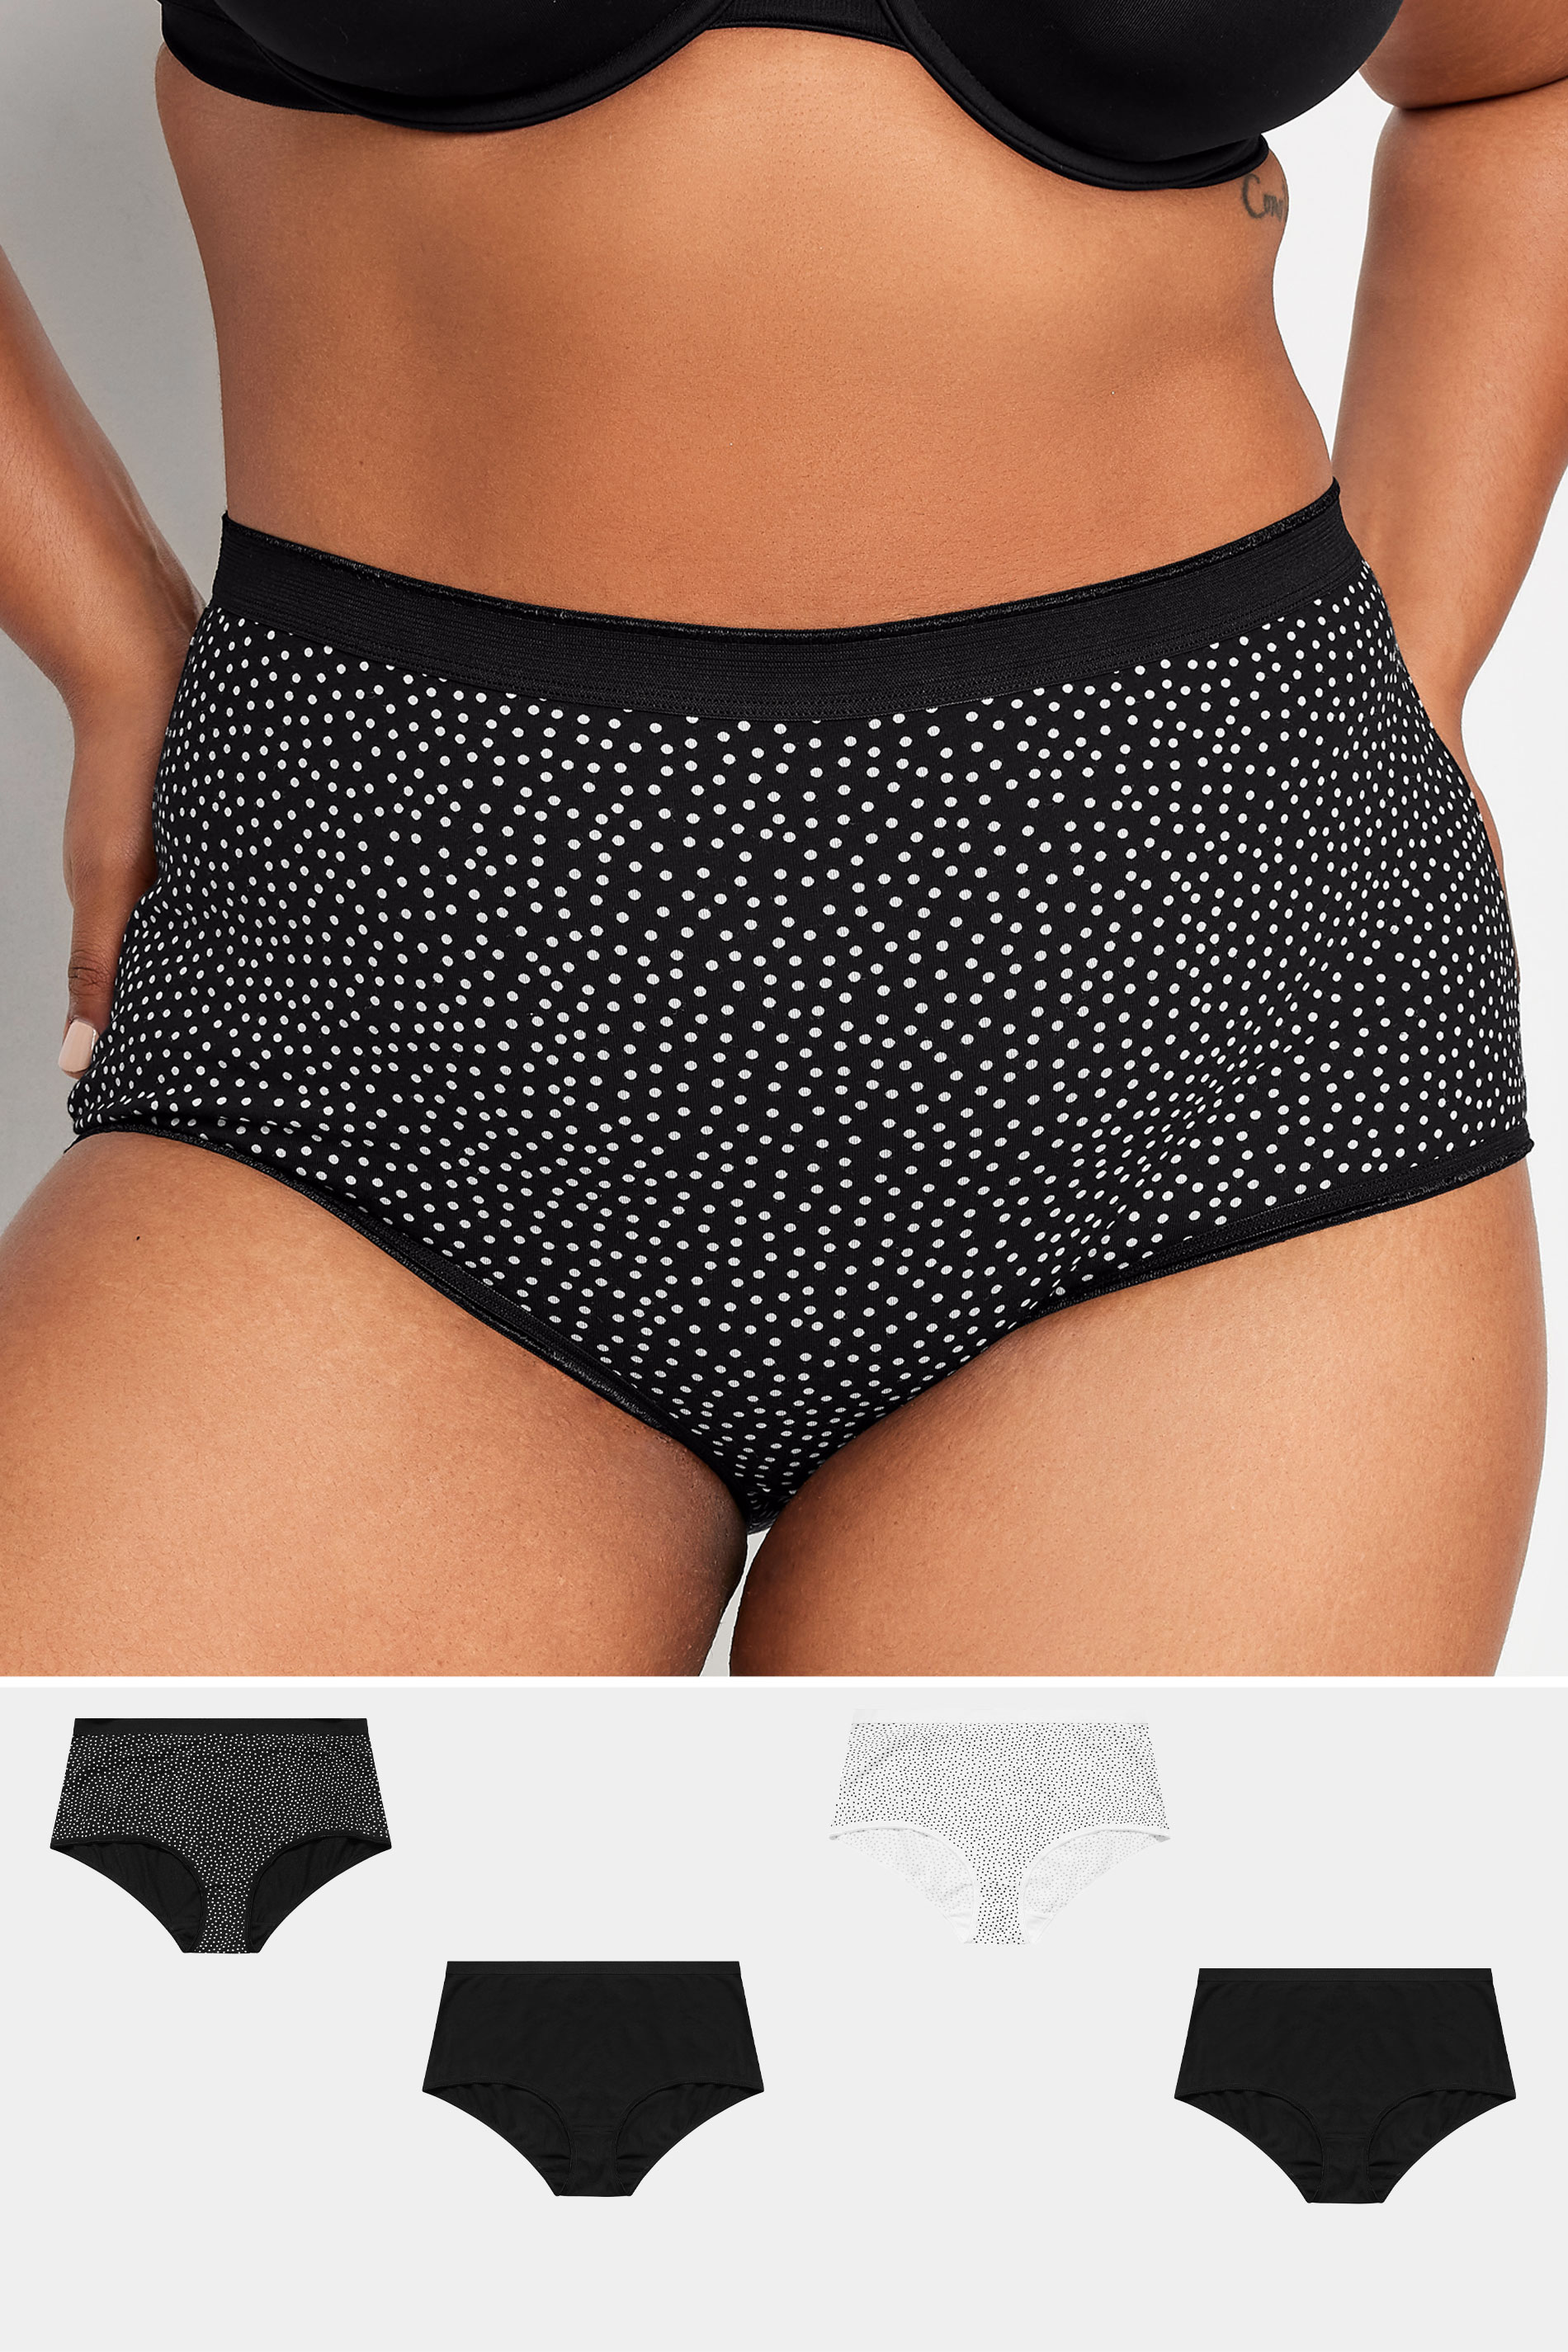 YOURS 4 PACK Plus Size Black Spot Print Cotton Stretch Full Briefs | Yours Clothing 1